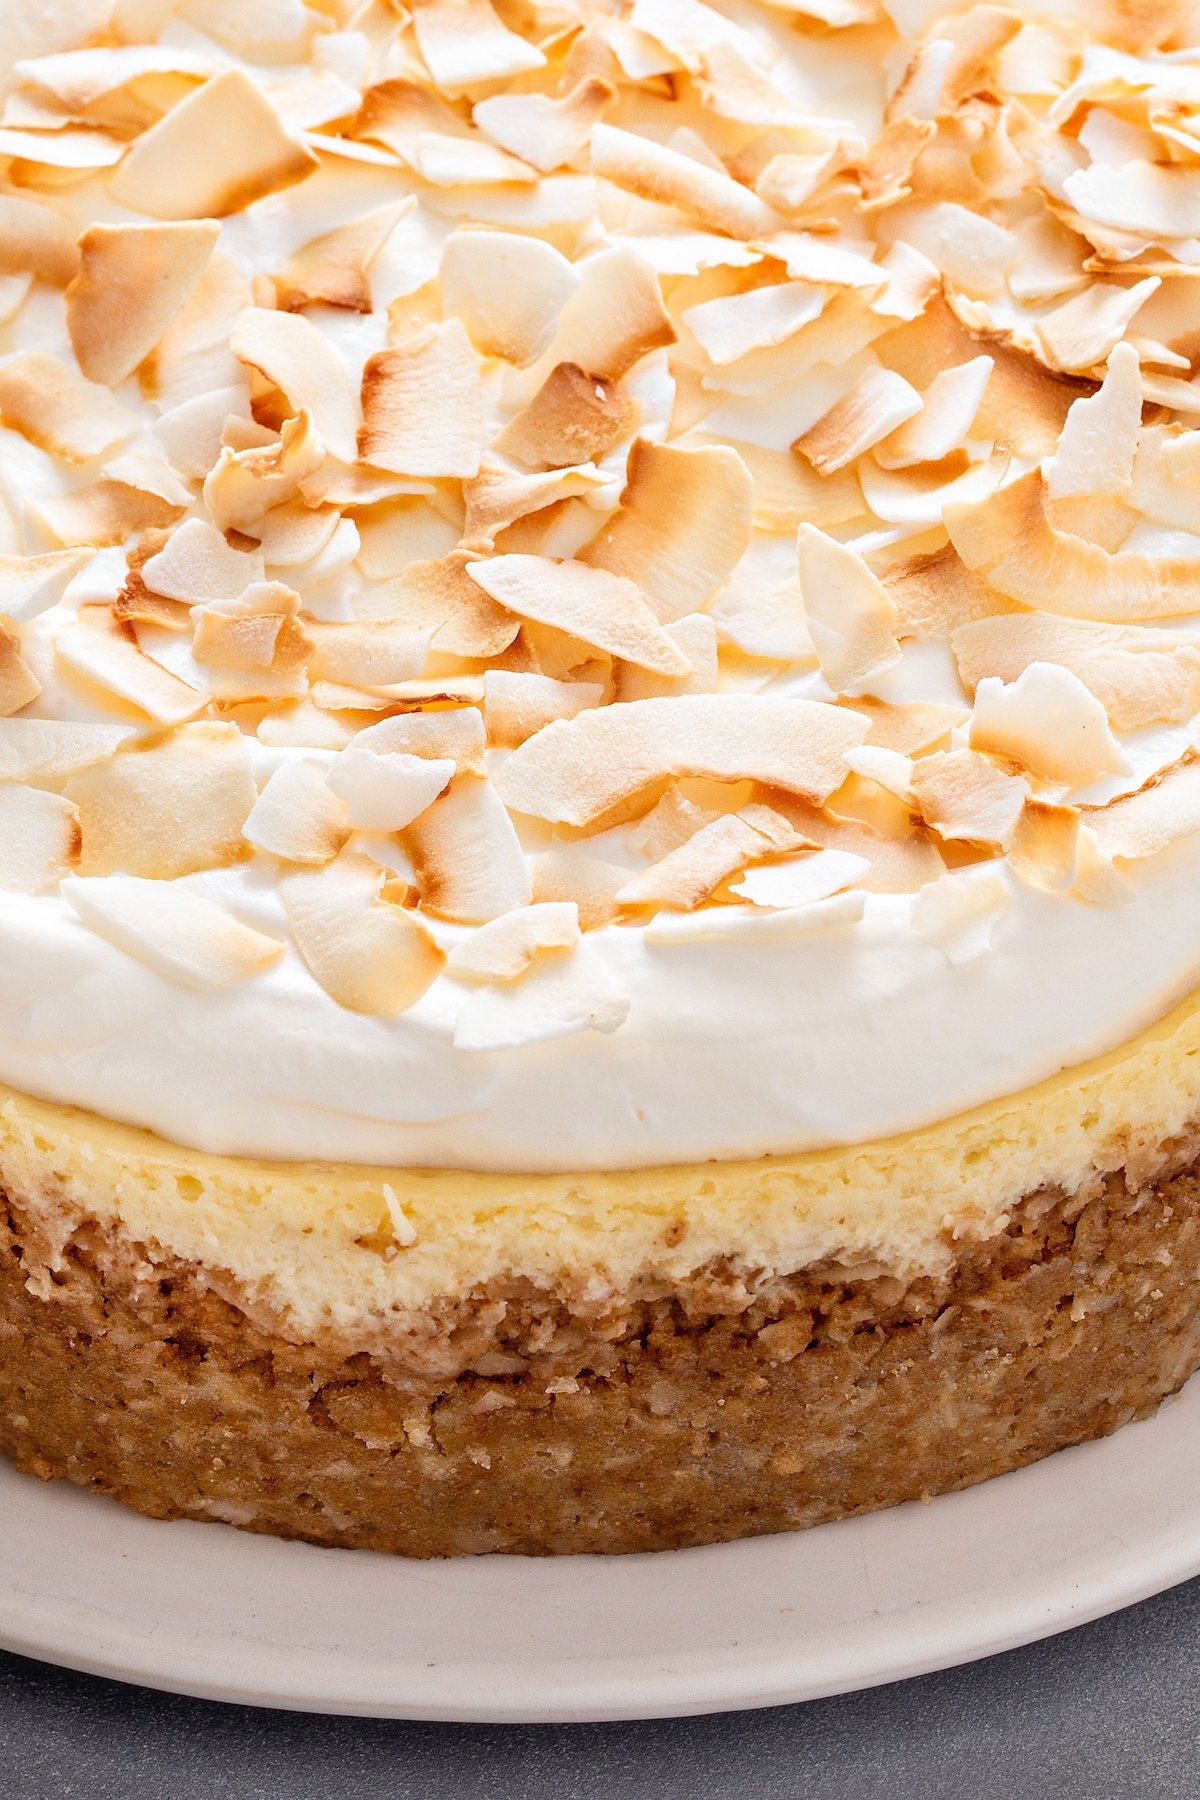 A cheesecake topped with whipped cream and toasted coconut.